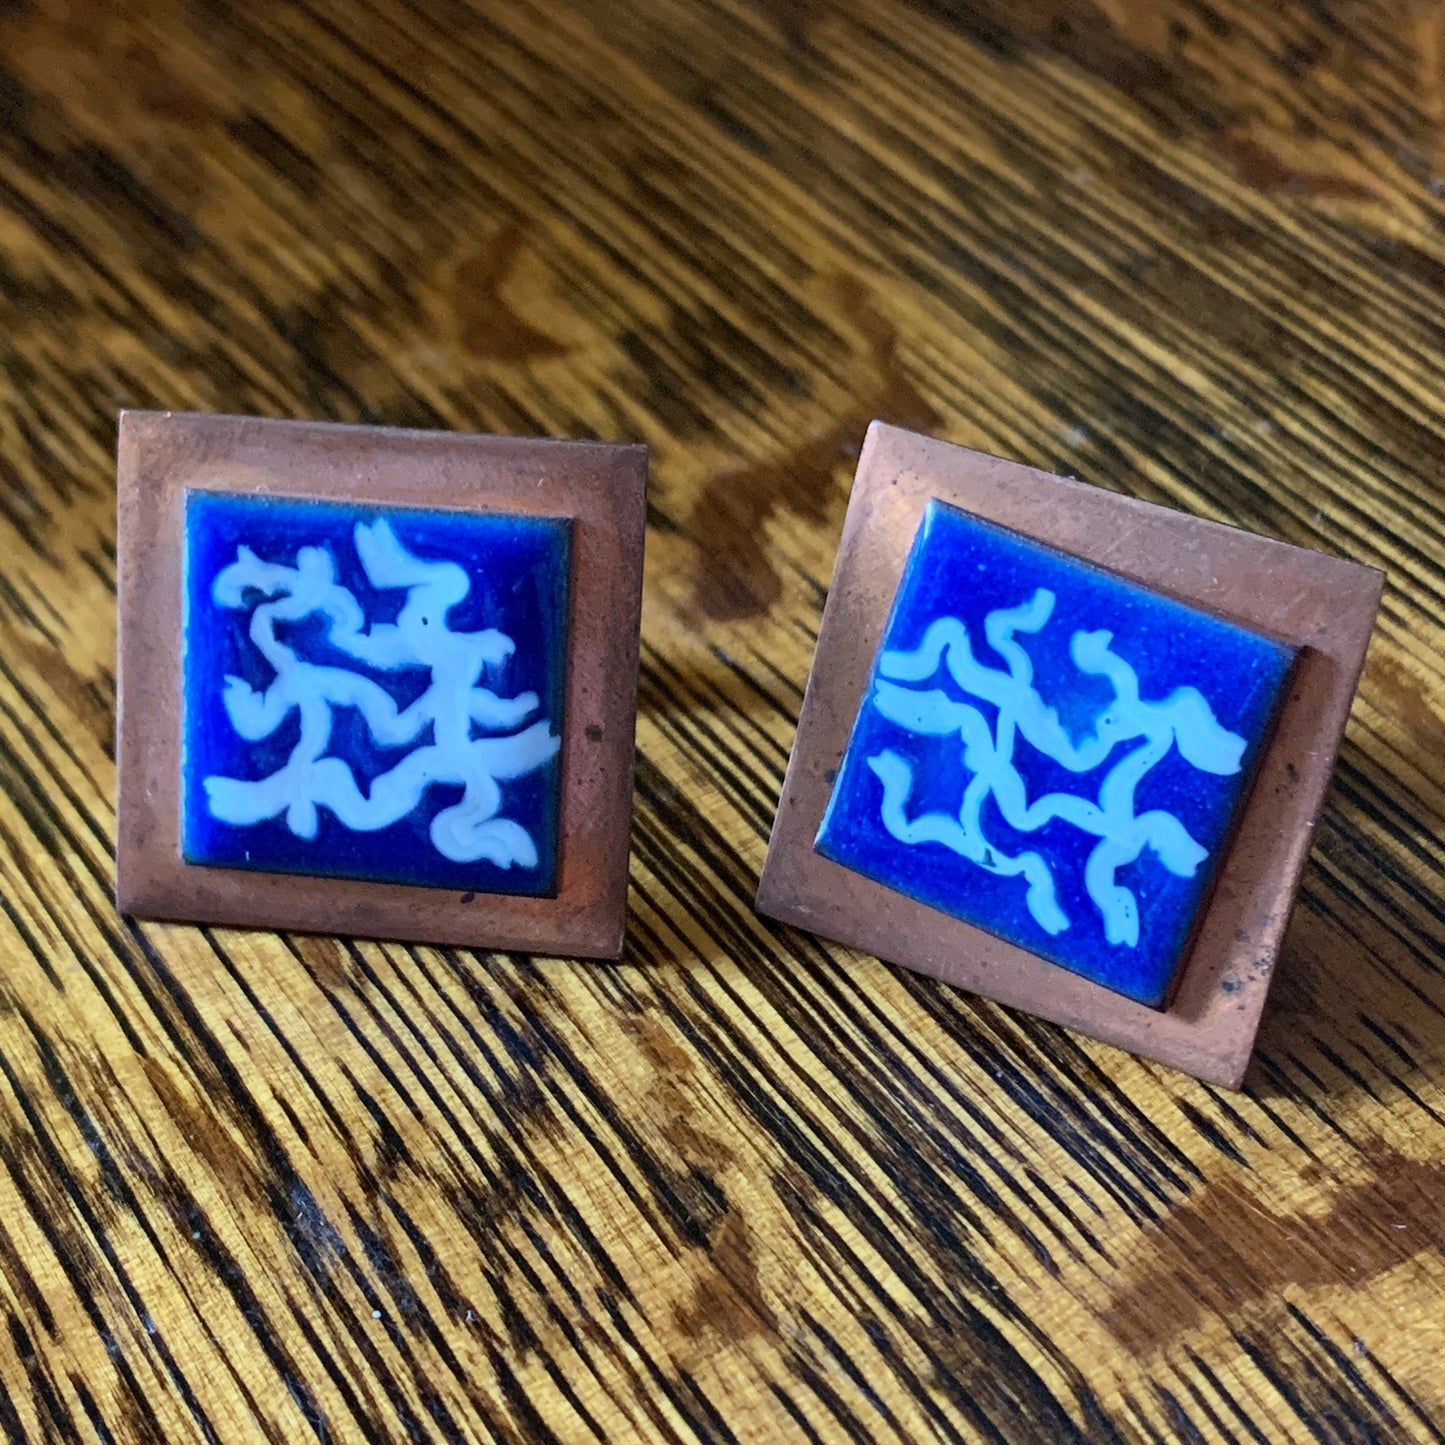 Large Square Copper Vintage Cufflinks with Blue and White Enamel